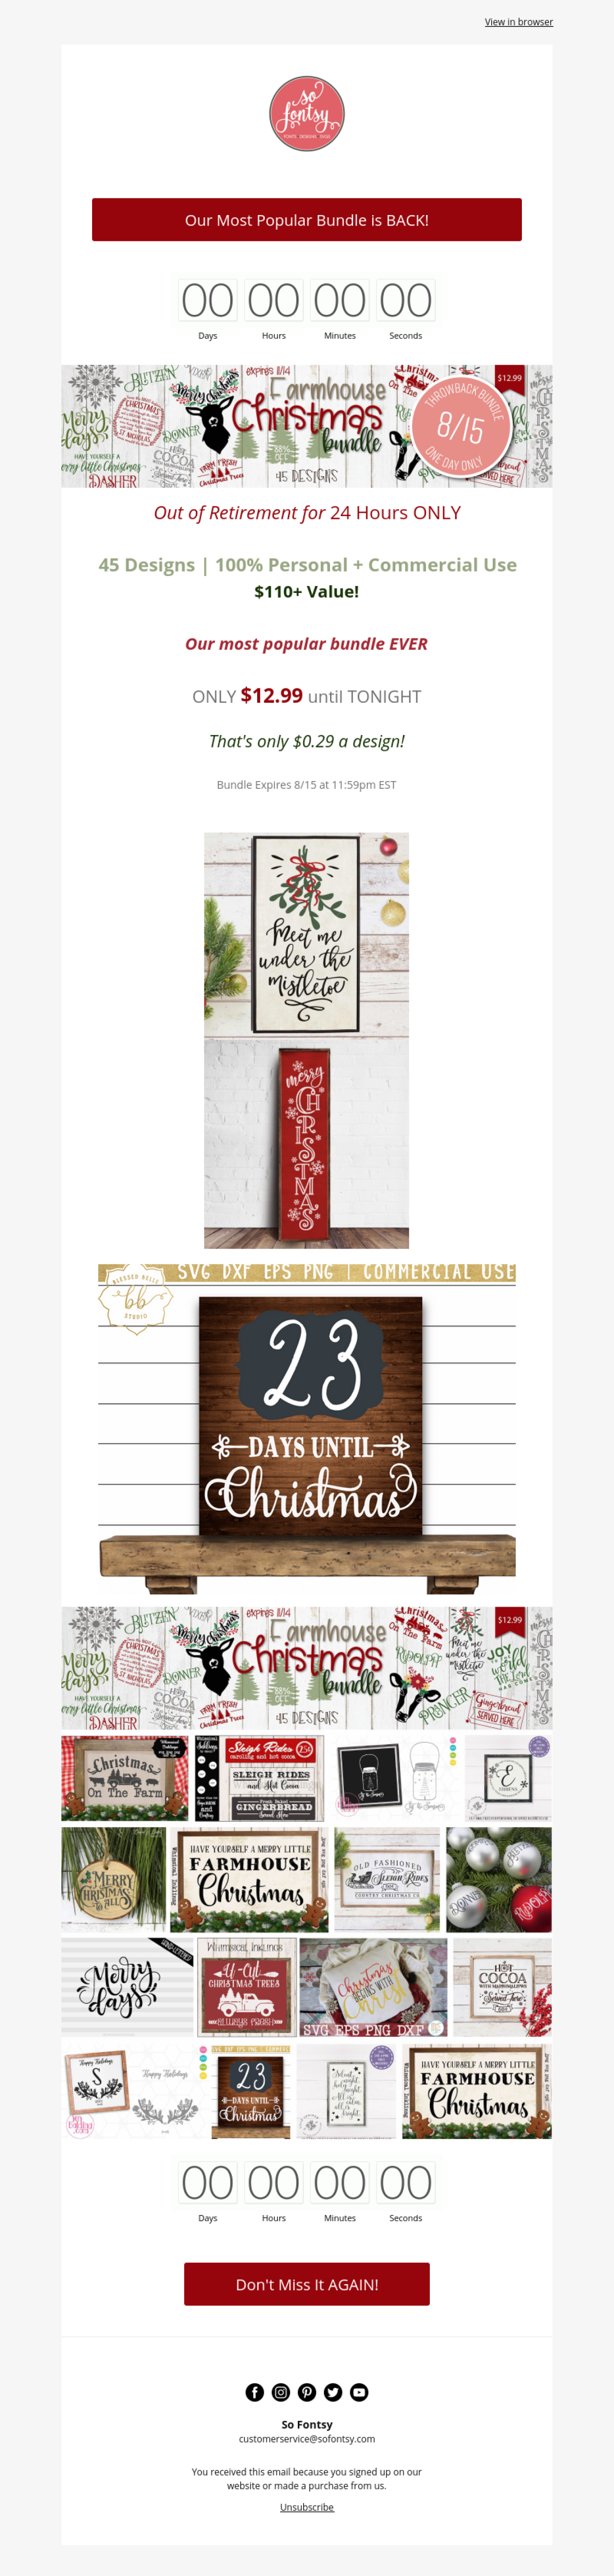 So Fontsy - Christmas example - Made with MailerLite